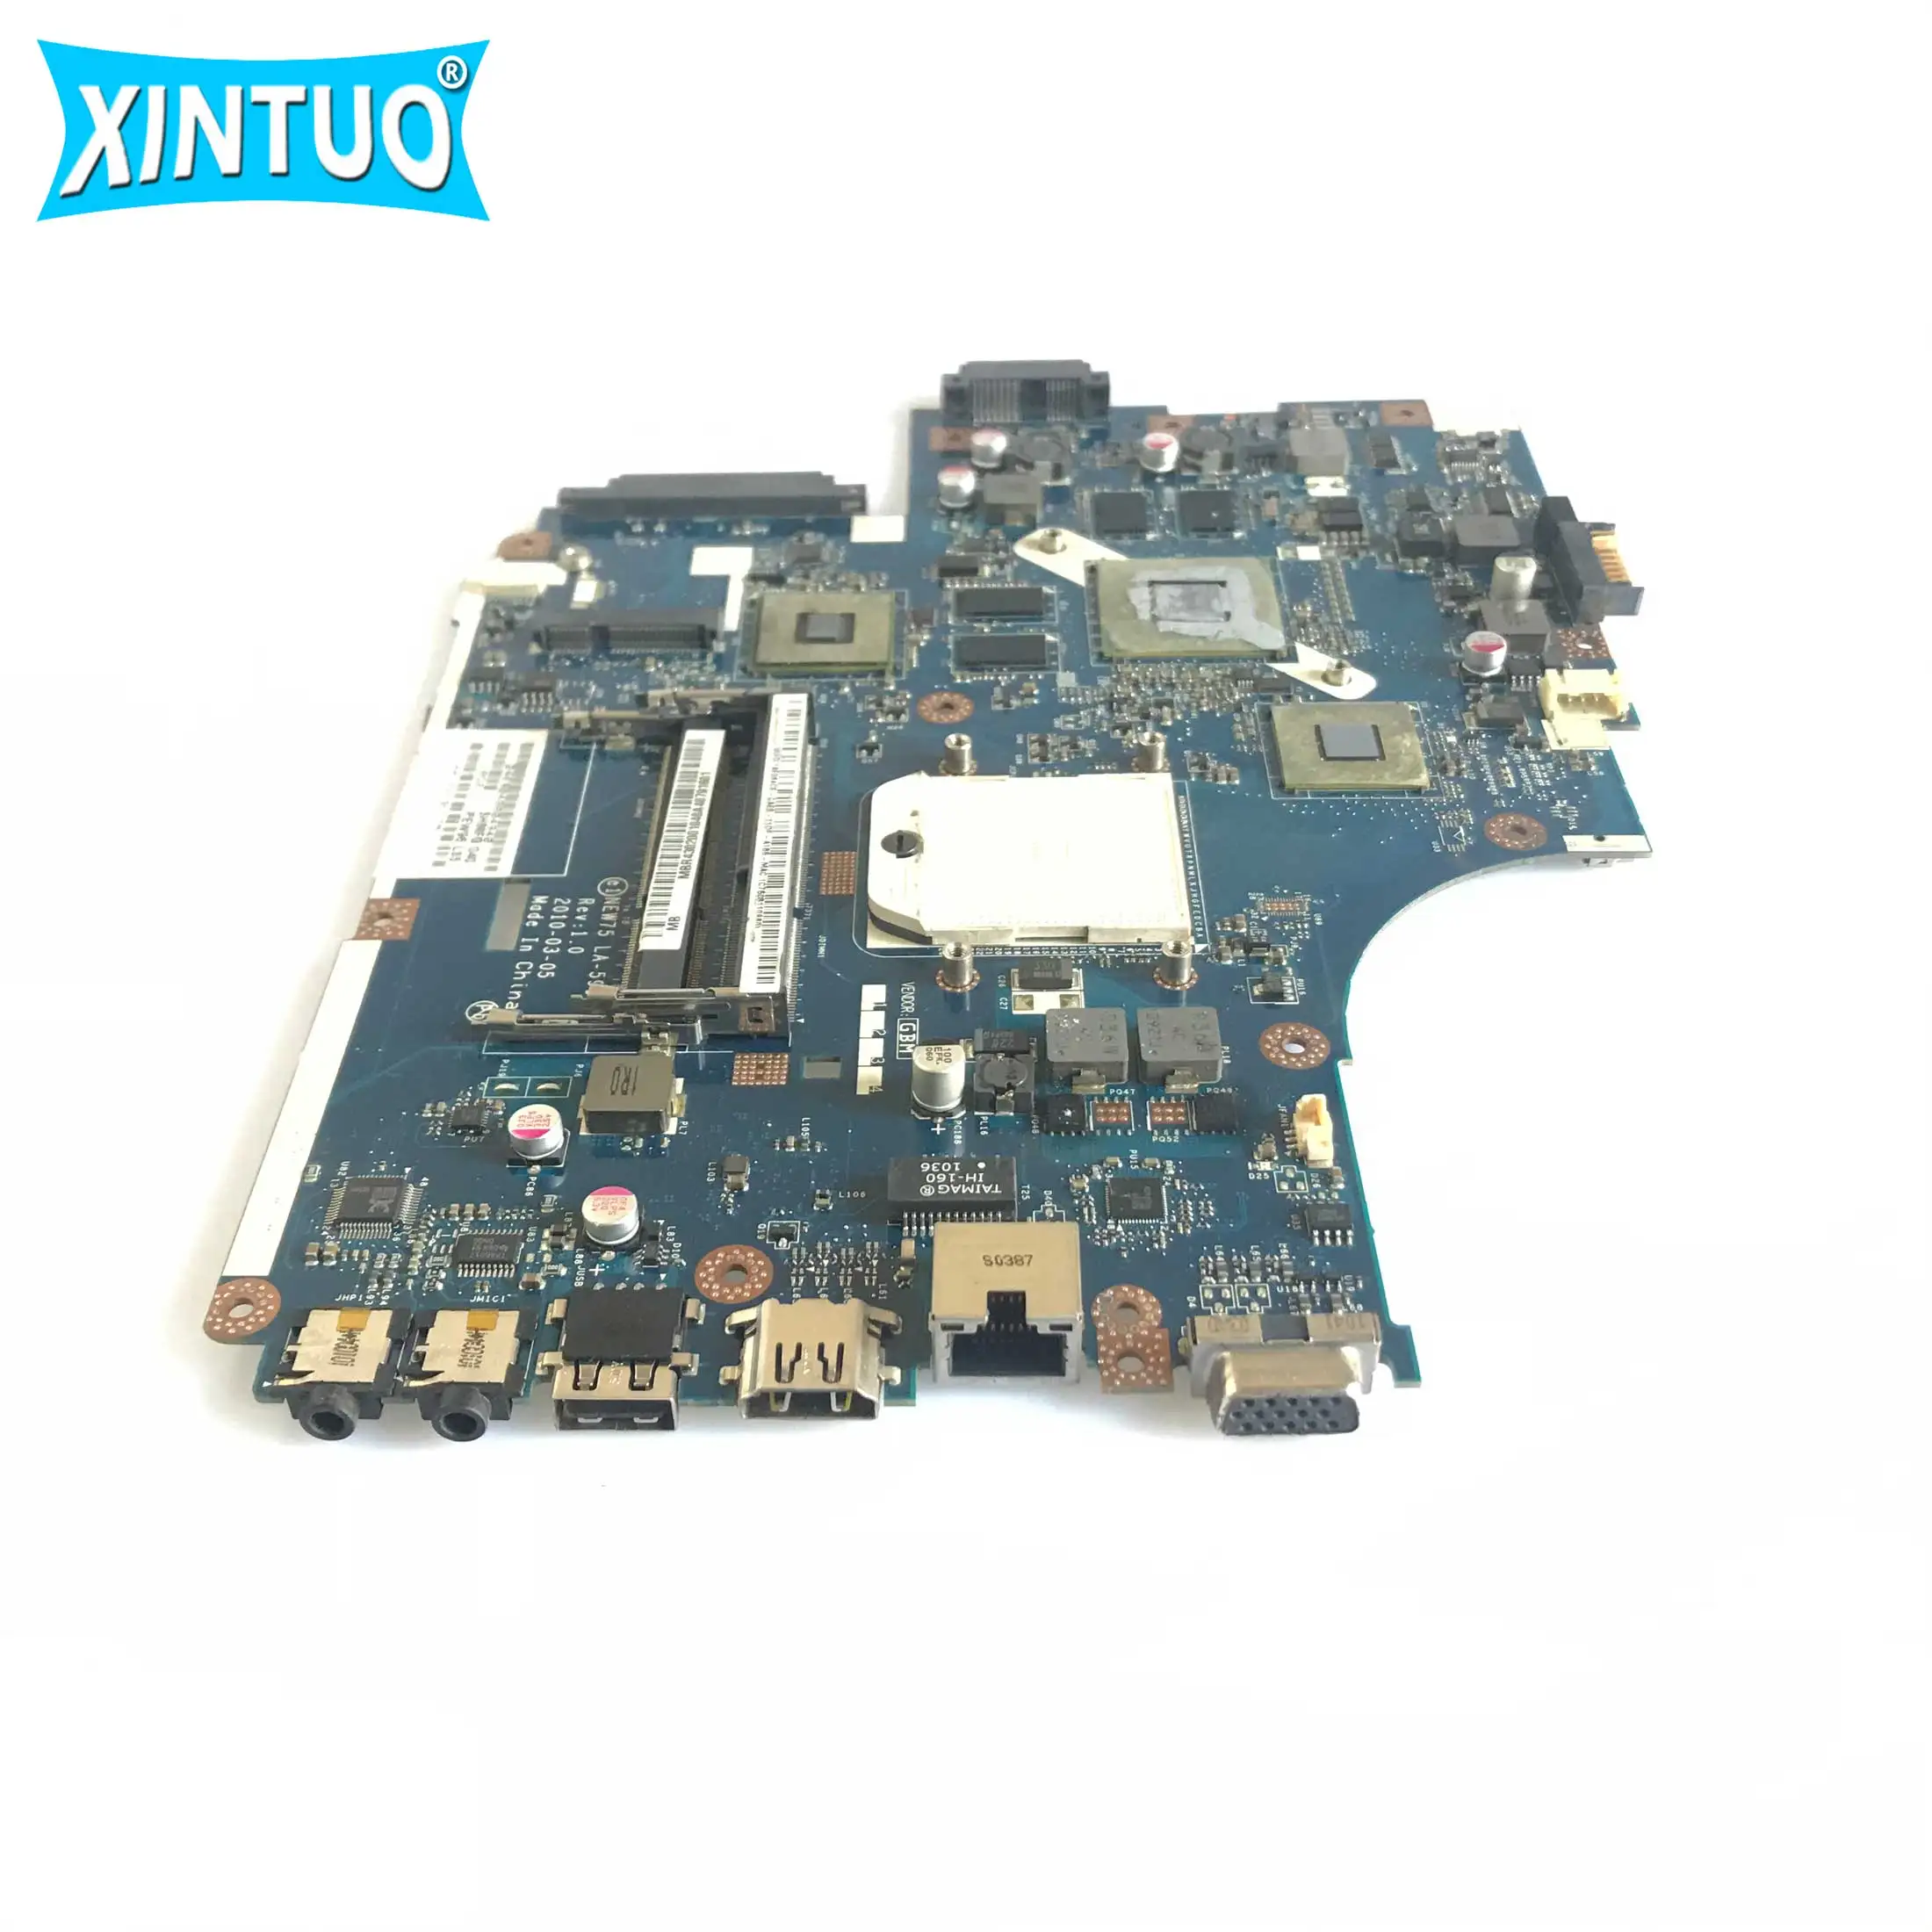 NEW75 LA-5911P motherboard for Acer aspire 5551G 5552 5552G laptop motherboard with HD6470M HD5650M GPU DDR3 100% test work enlarge